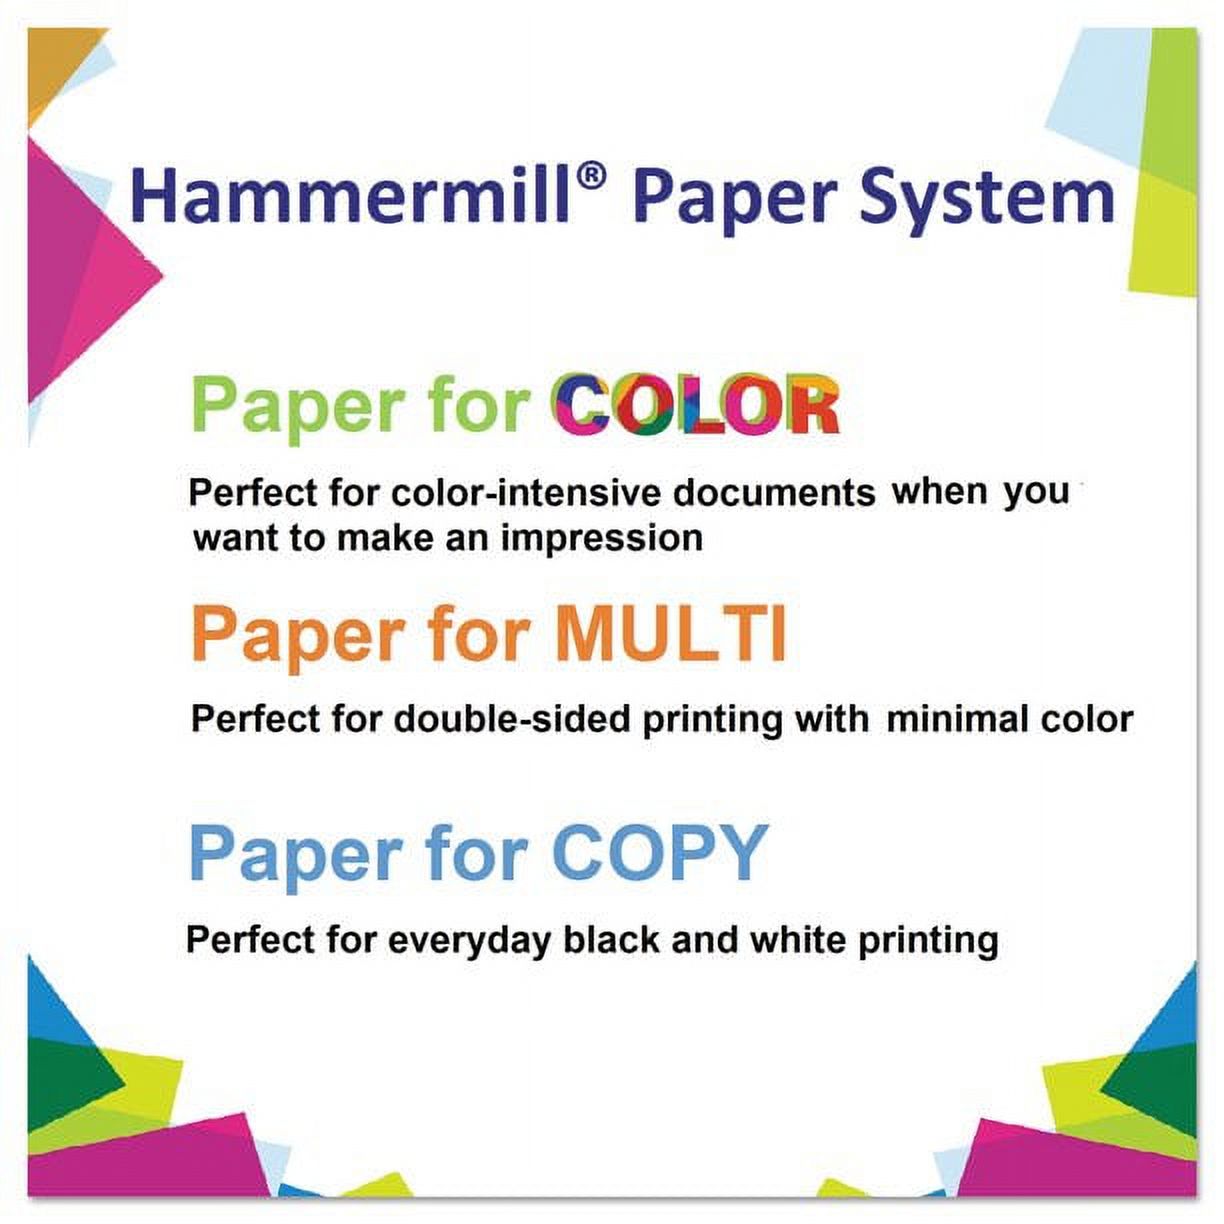 Hammermill Recycled Color Papers, 8.5" x 11", 500 Sheets - image 3 of 3